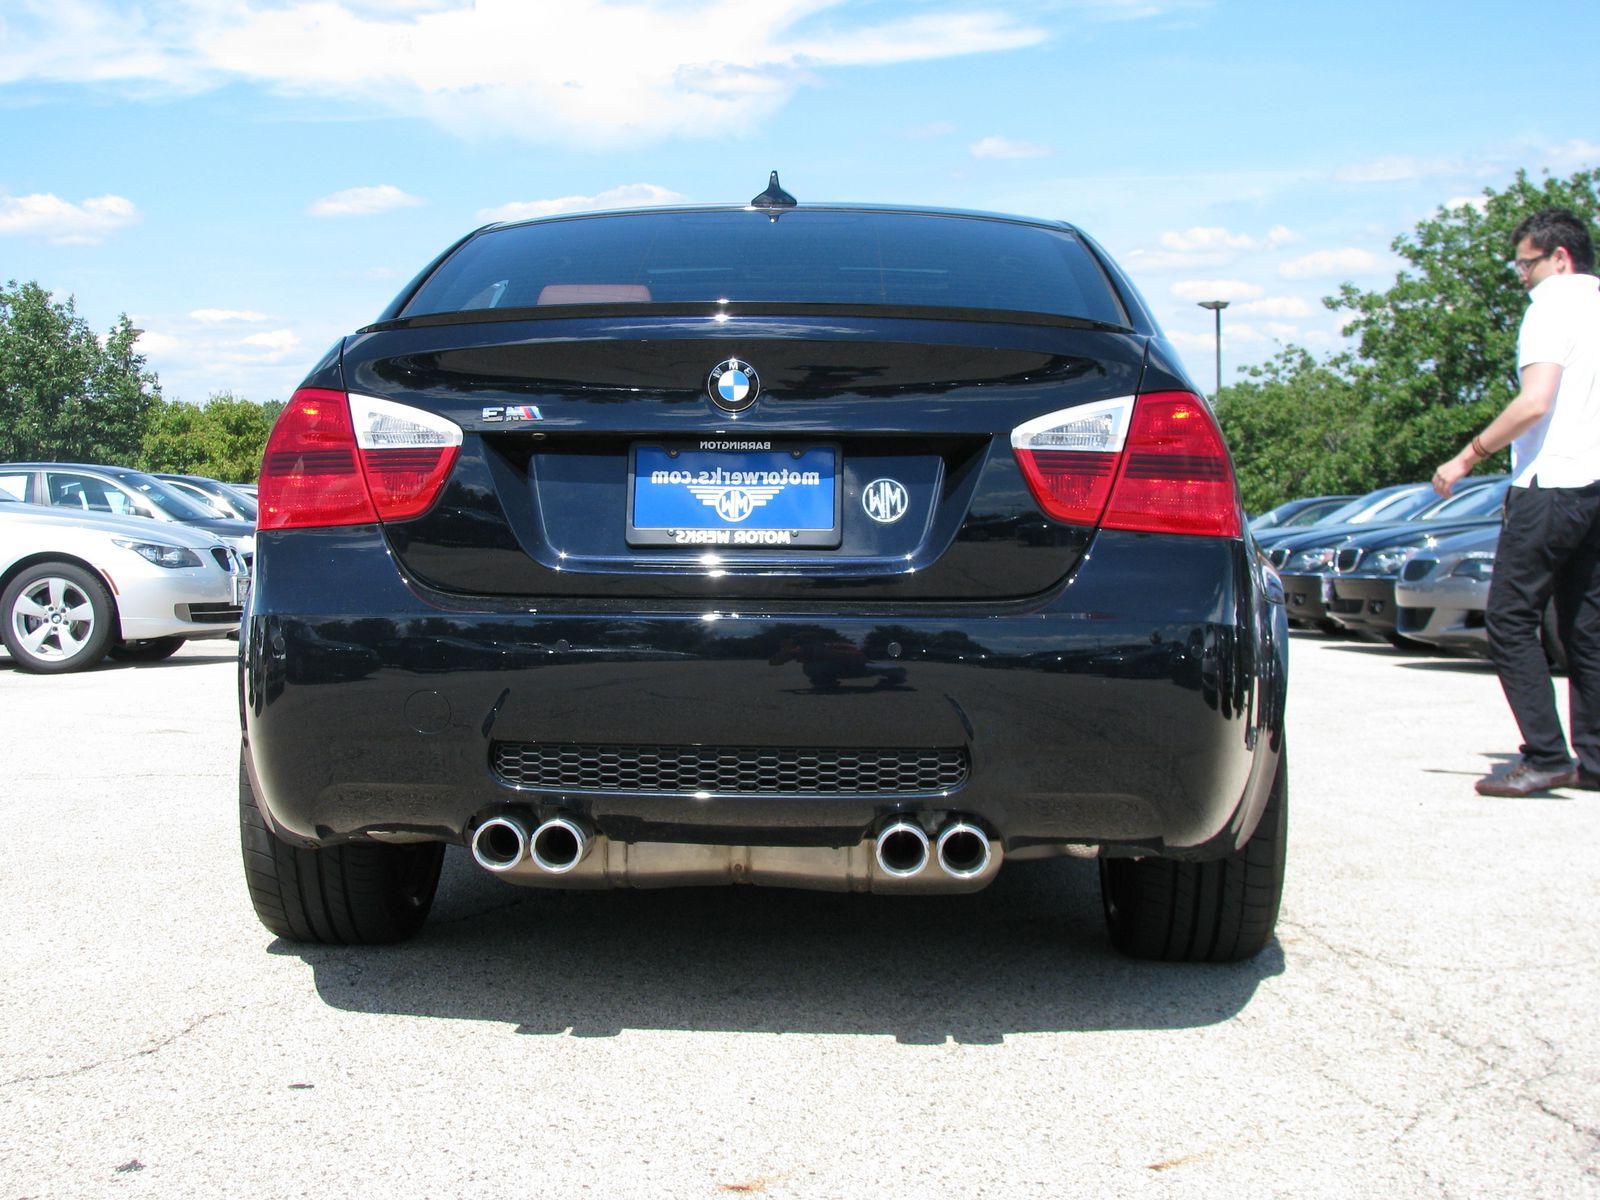 for an E90 M3 in Silver.